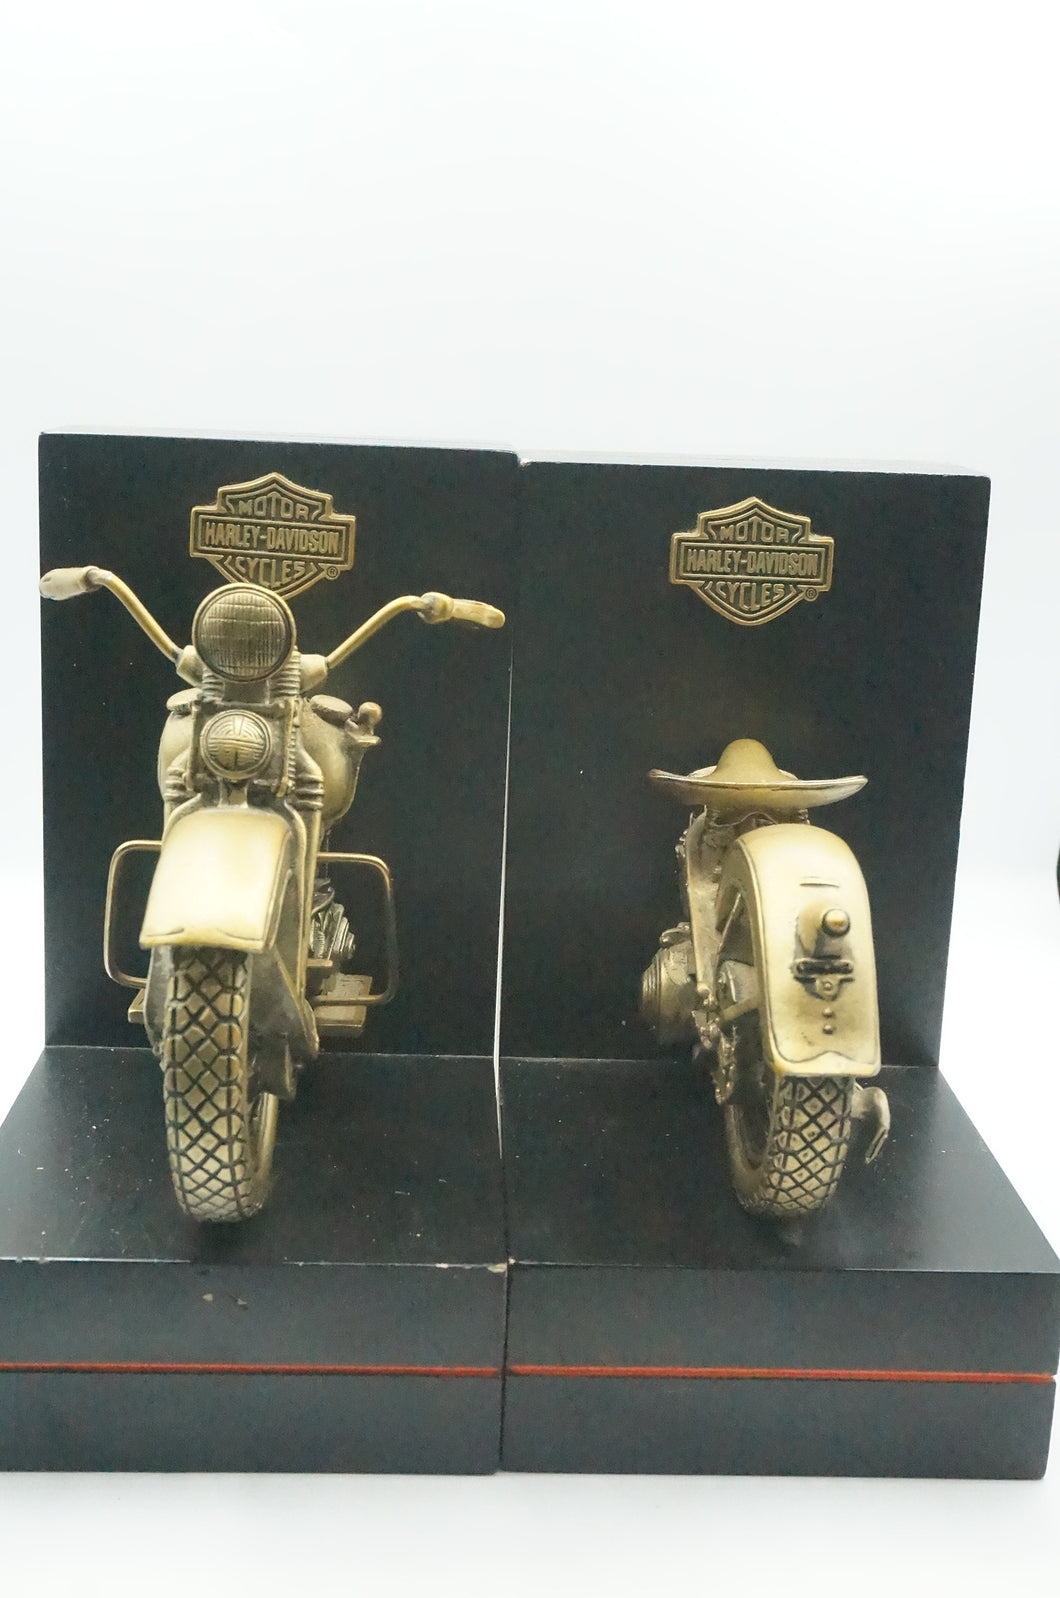 Harley Davidson Book Ends - Ohiohippies.com